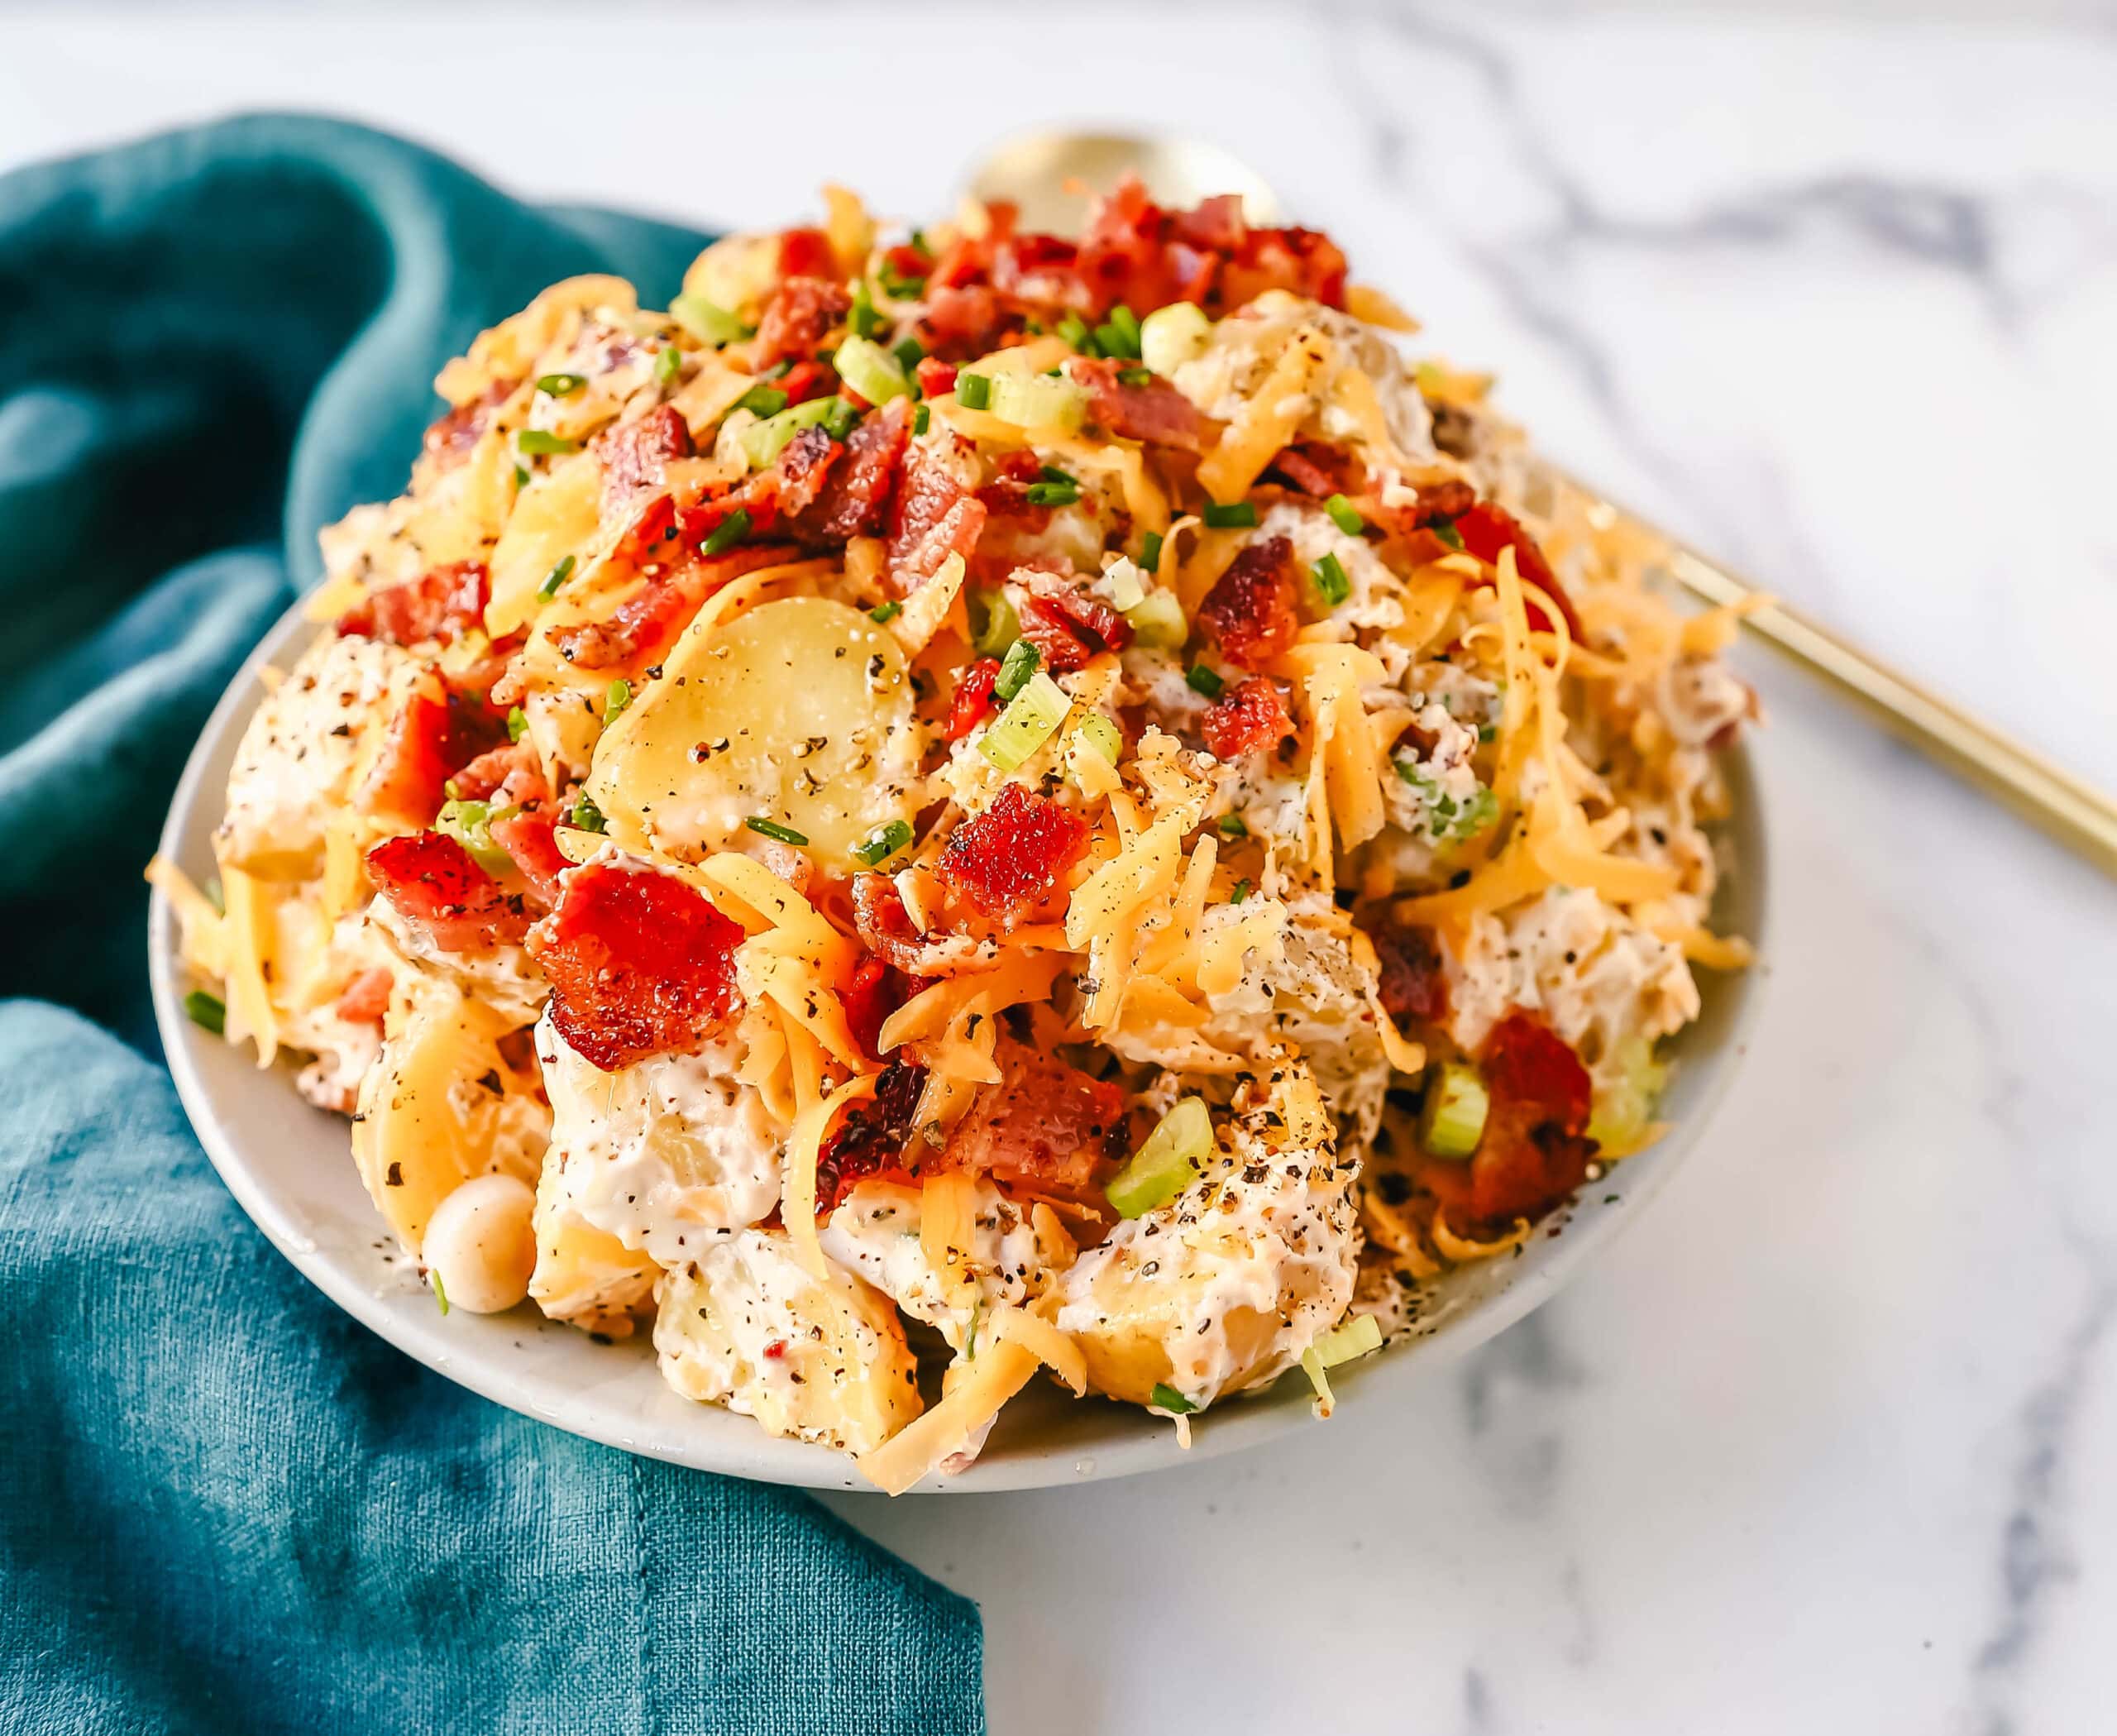 The Best Loaded Potato Salad Recipe is made with creamy gold potatoes, crispy bacon, cheddar cheese, green onions, sour cream, mayonnaise, seasoned salt, and pepper. The perfect baked potato salad recipe is perfect for your next party, potluck, or as a BBQ side dish.